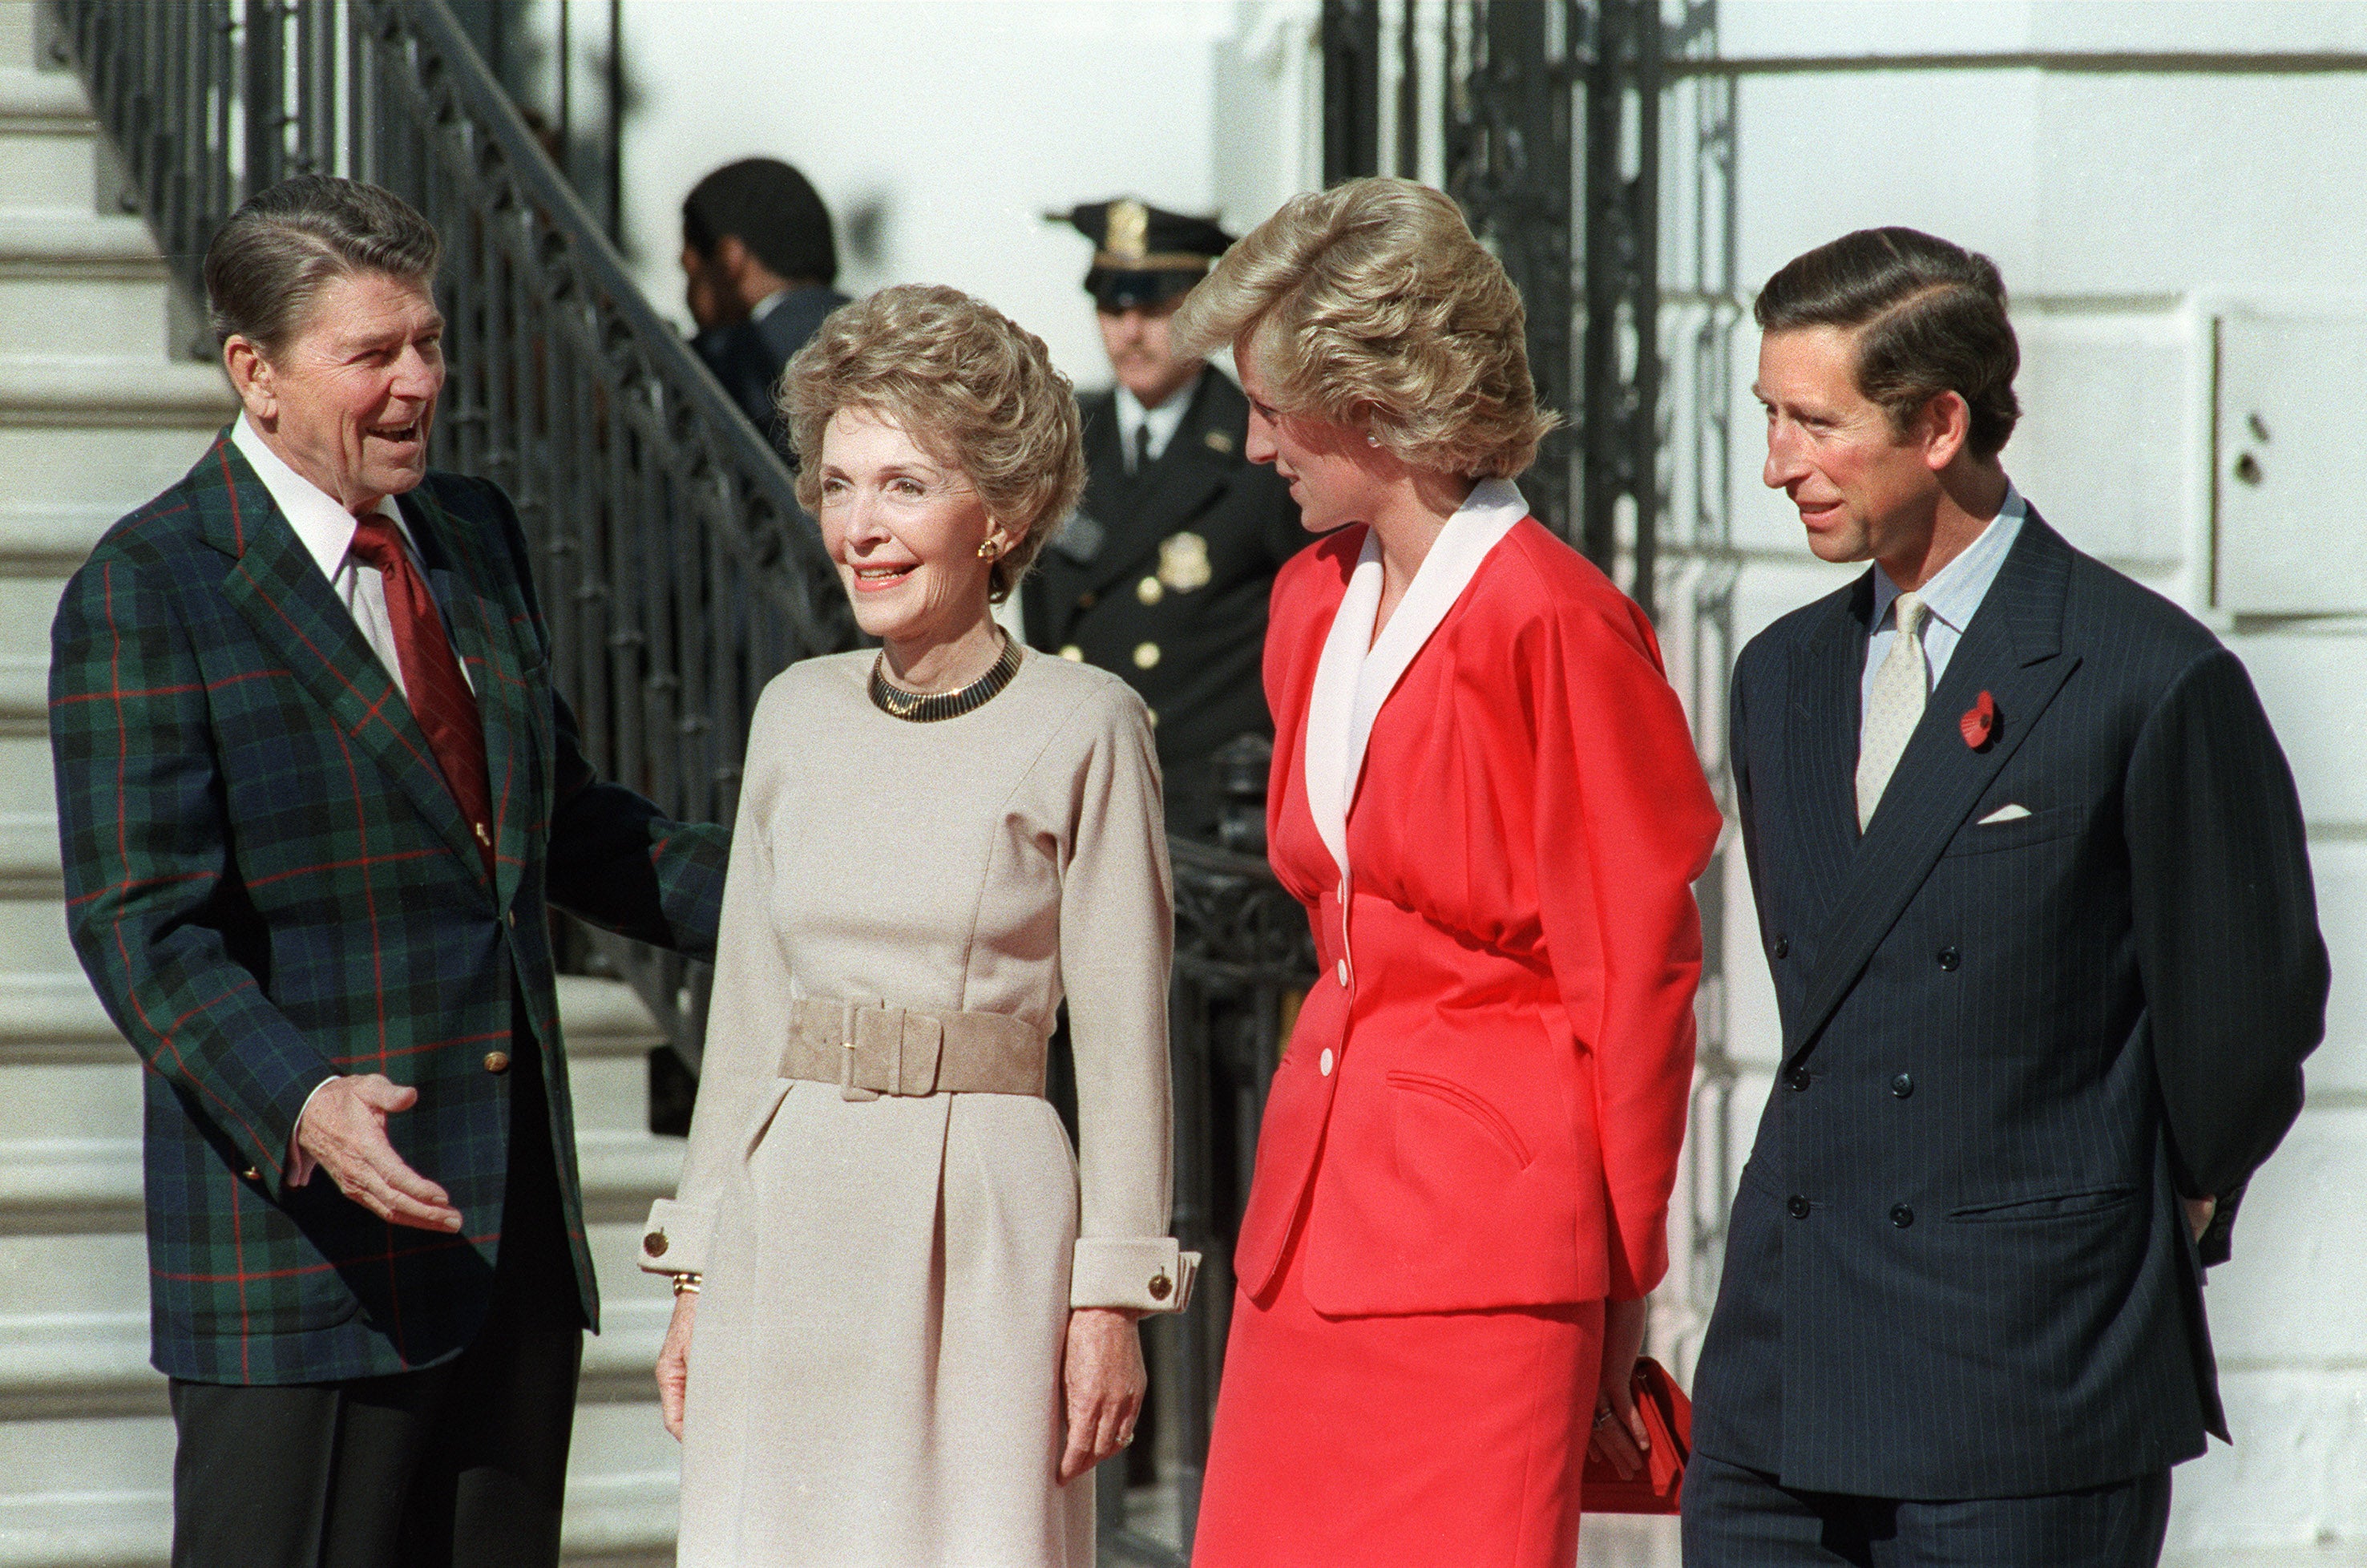 President Ronald Reagan and First Lady Nancy Reagan welcome the Prince and Princess of Wales to the White House in November 1985